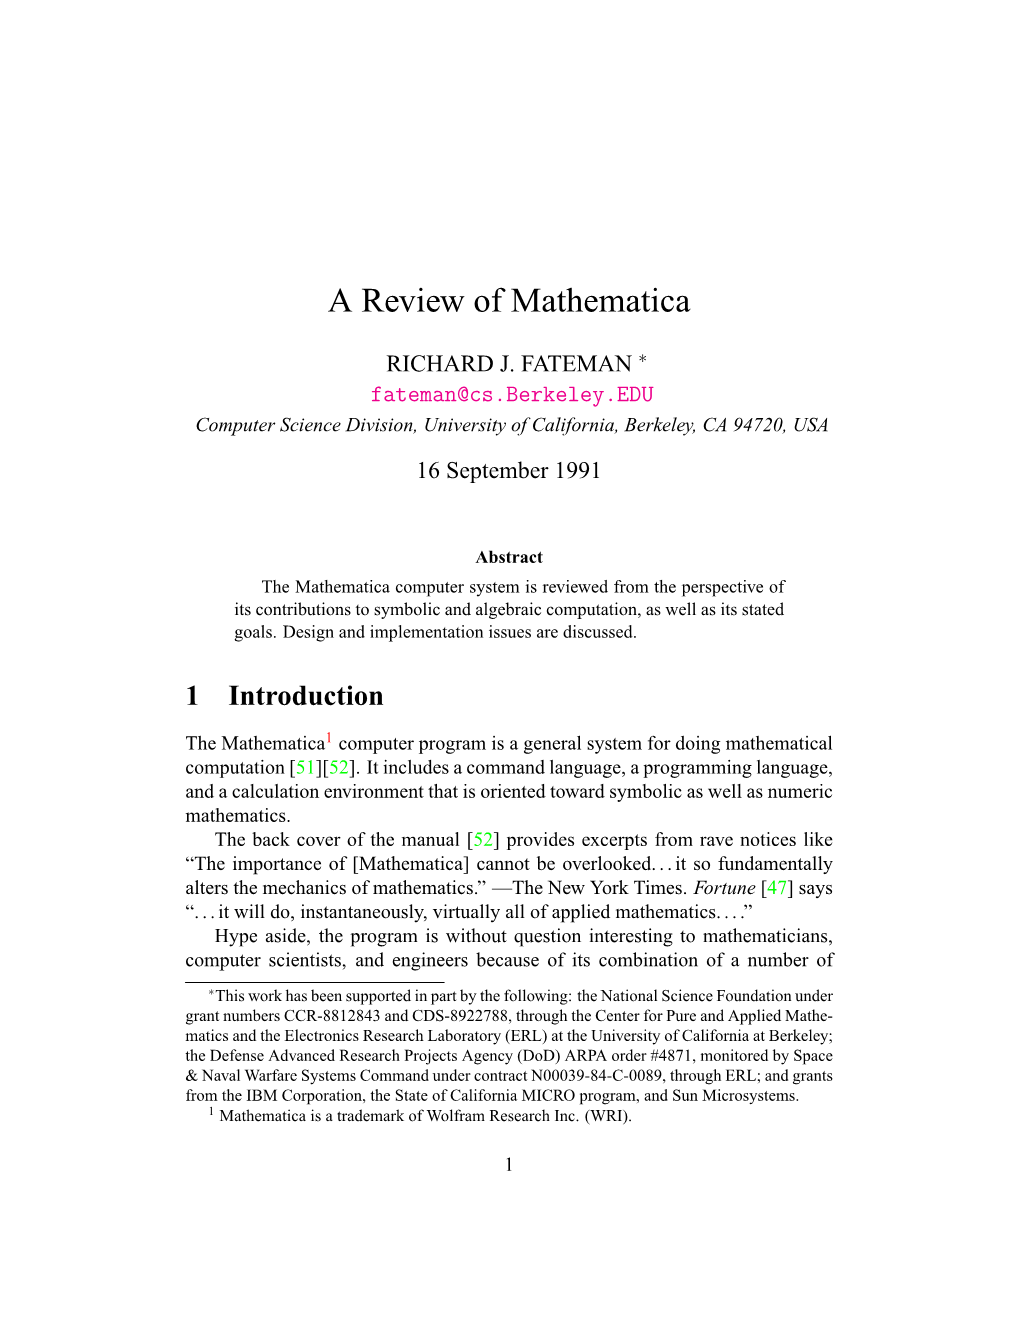 A Review of Mathematica